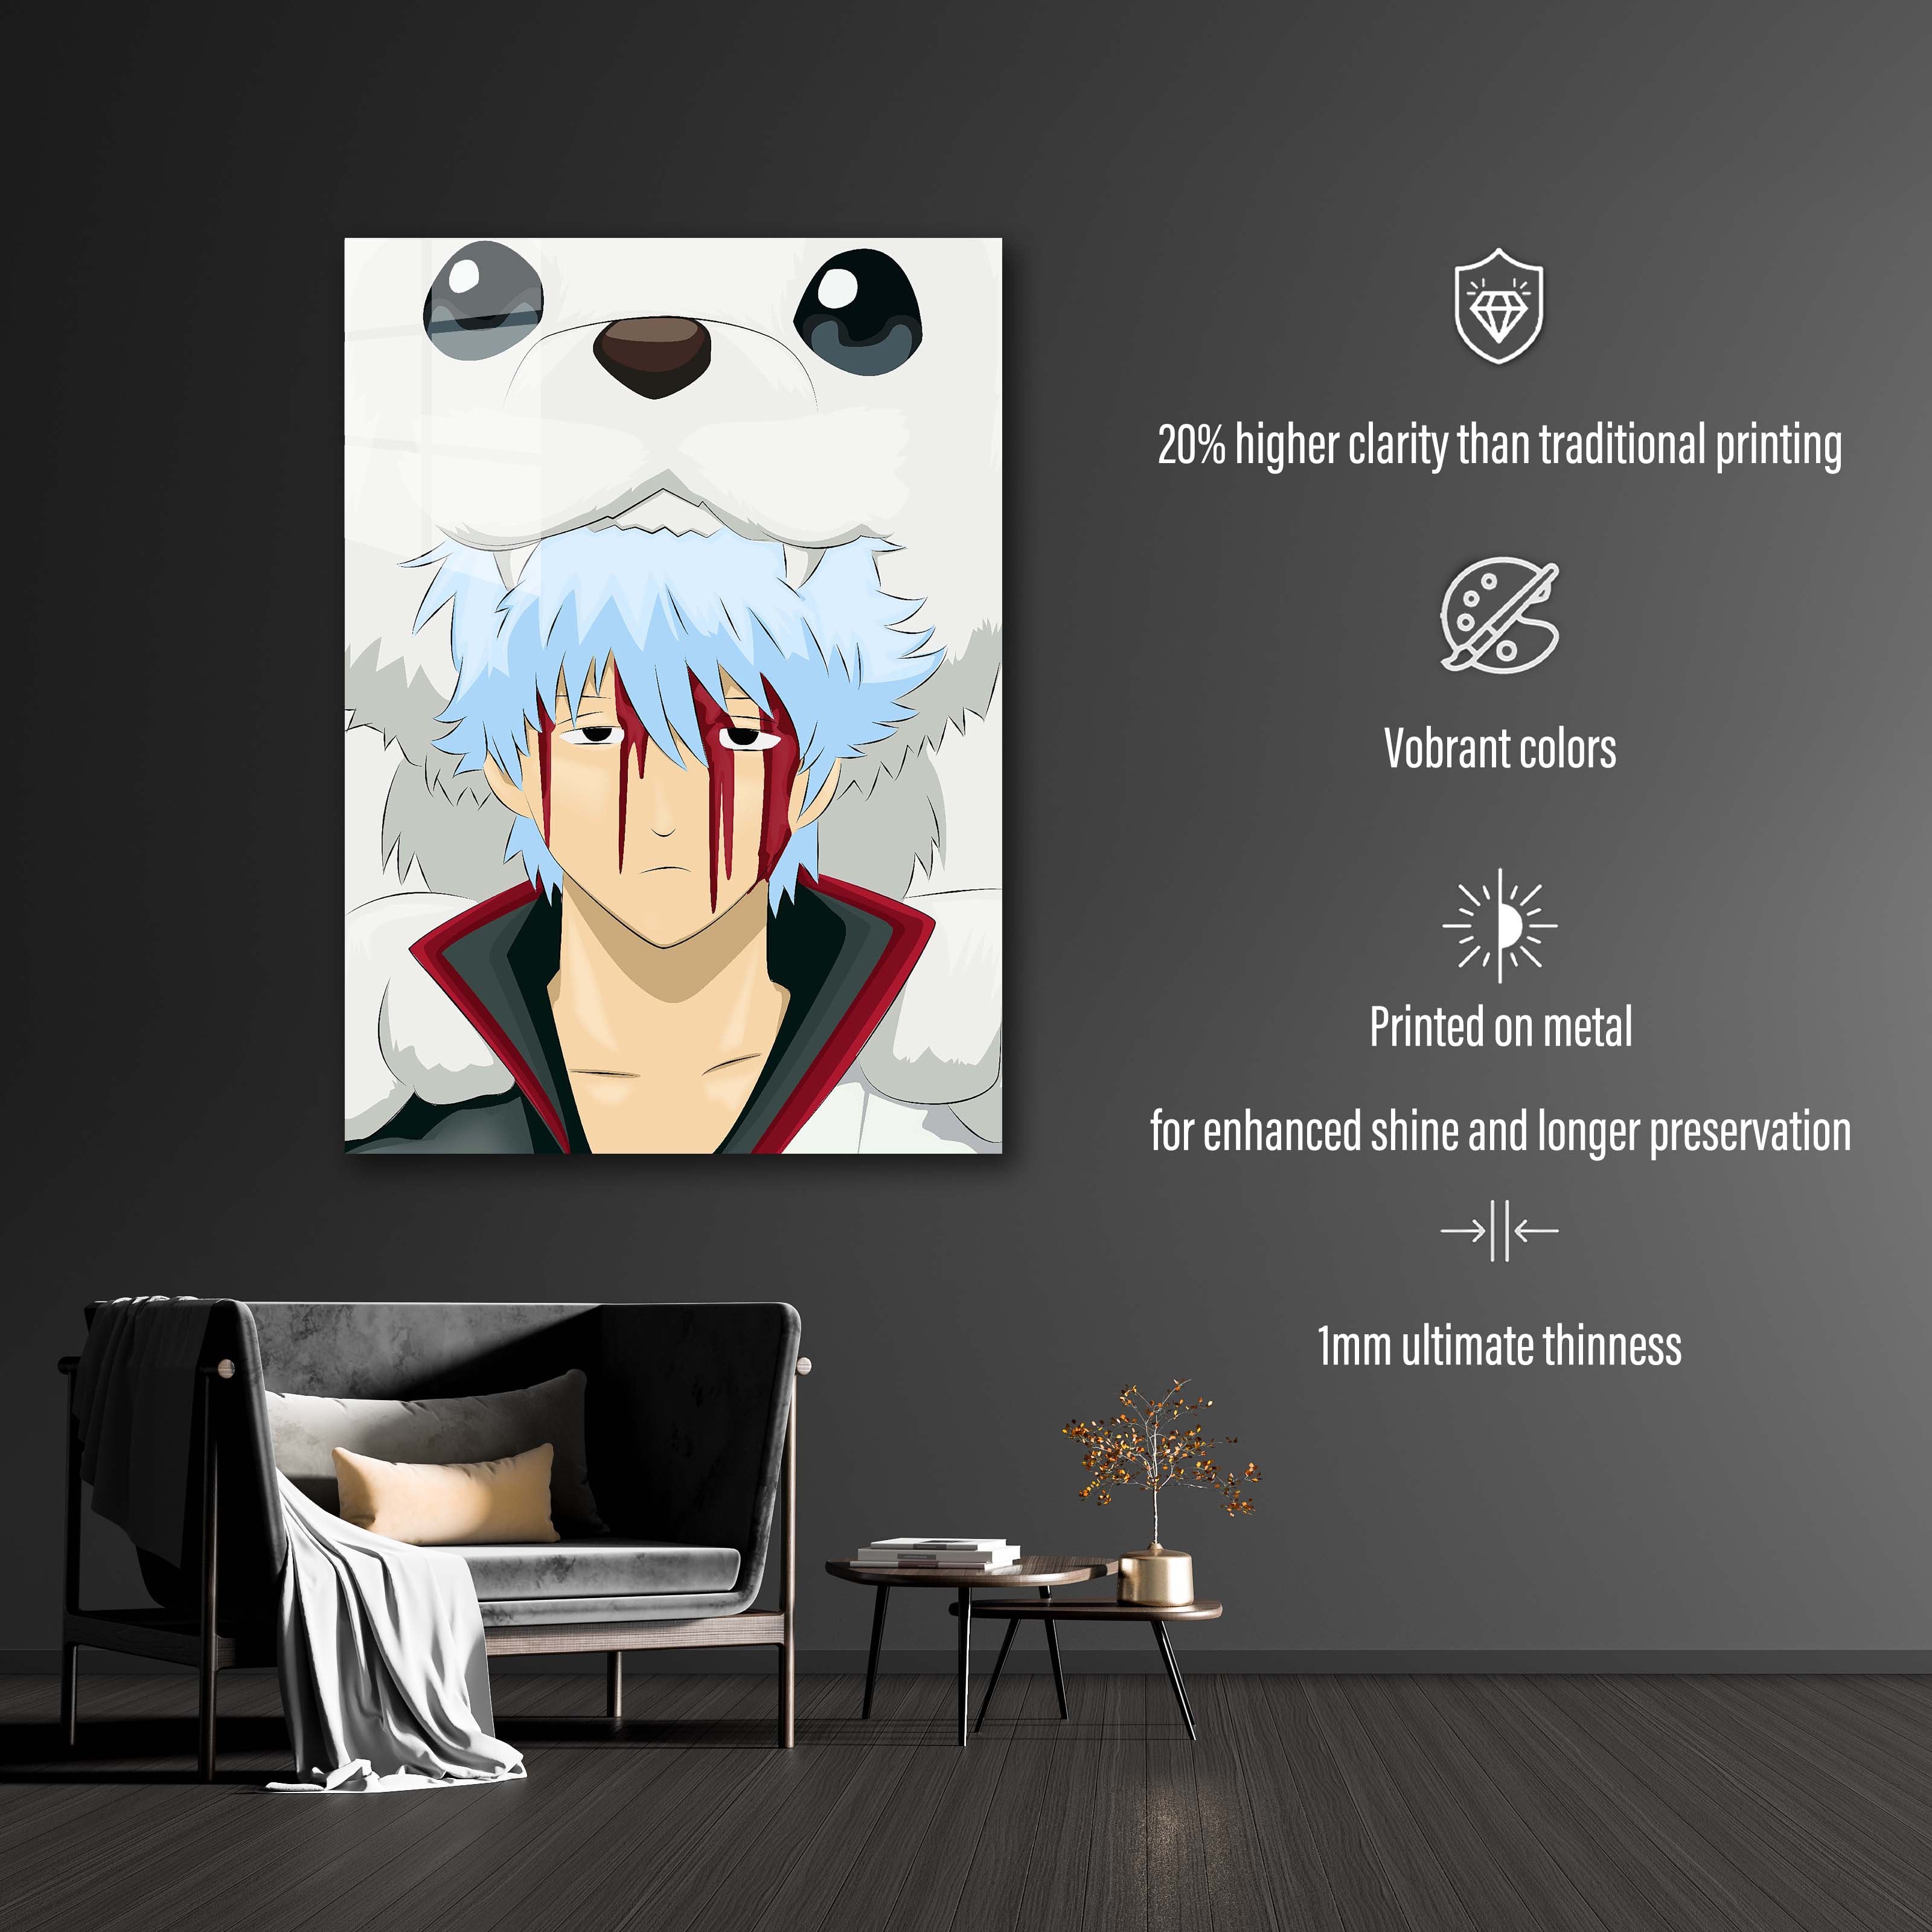 Gintoki-designed by @Inspire Collection